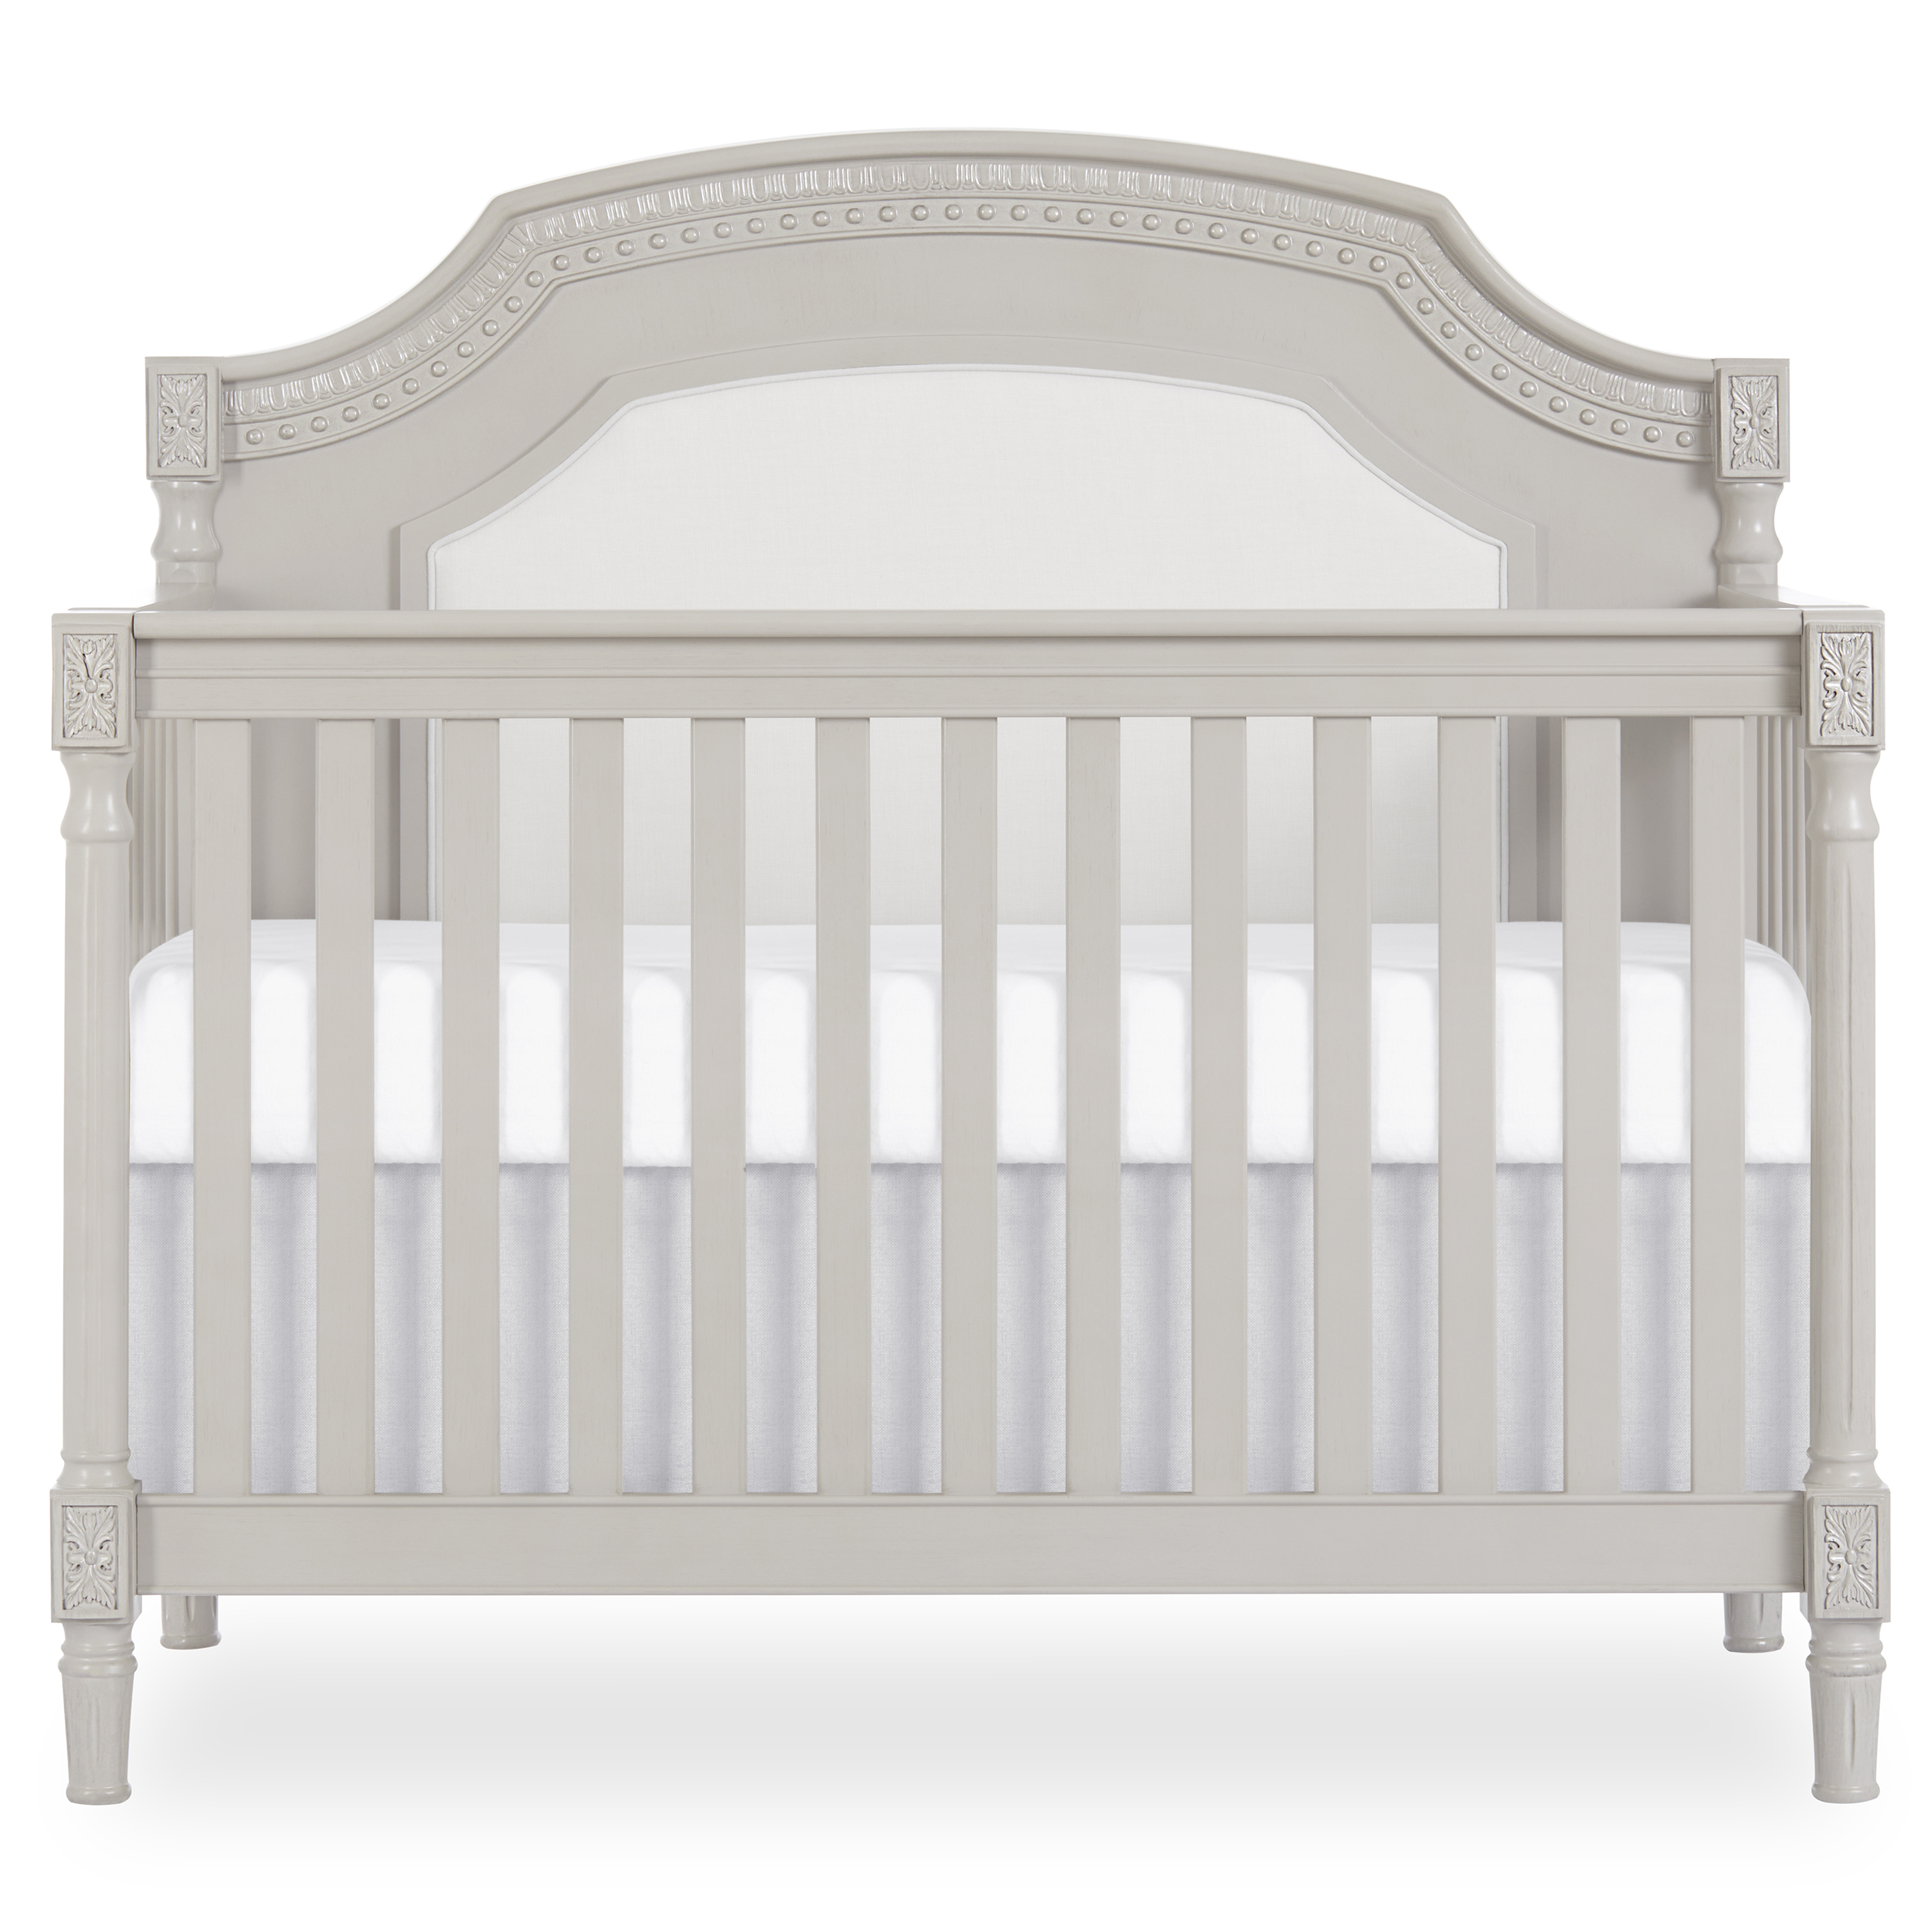 Evolur Nursery Essentials Bundle of Julienne 5-in-1 Convertible Crib, Julienne Double Dresser & London Upholstered 360 Swivel Glider, with a Premium Dream On Me Crib Mattress - image 2 of 11